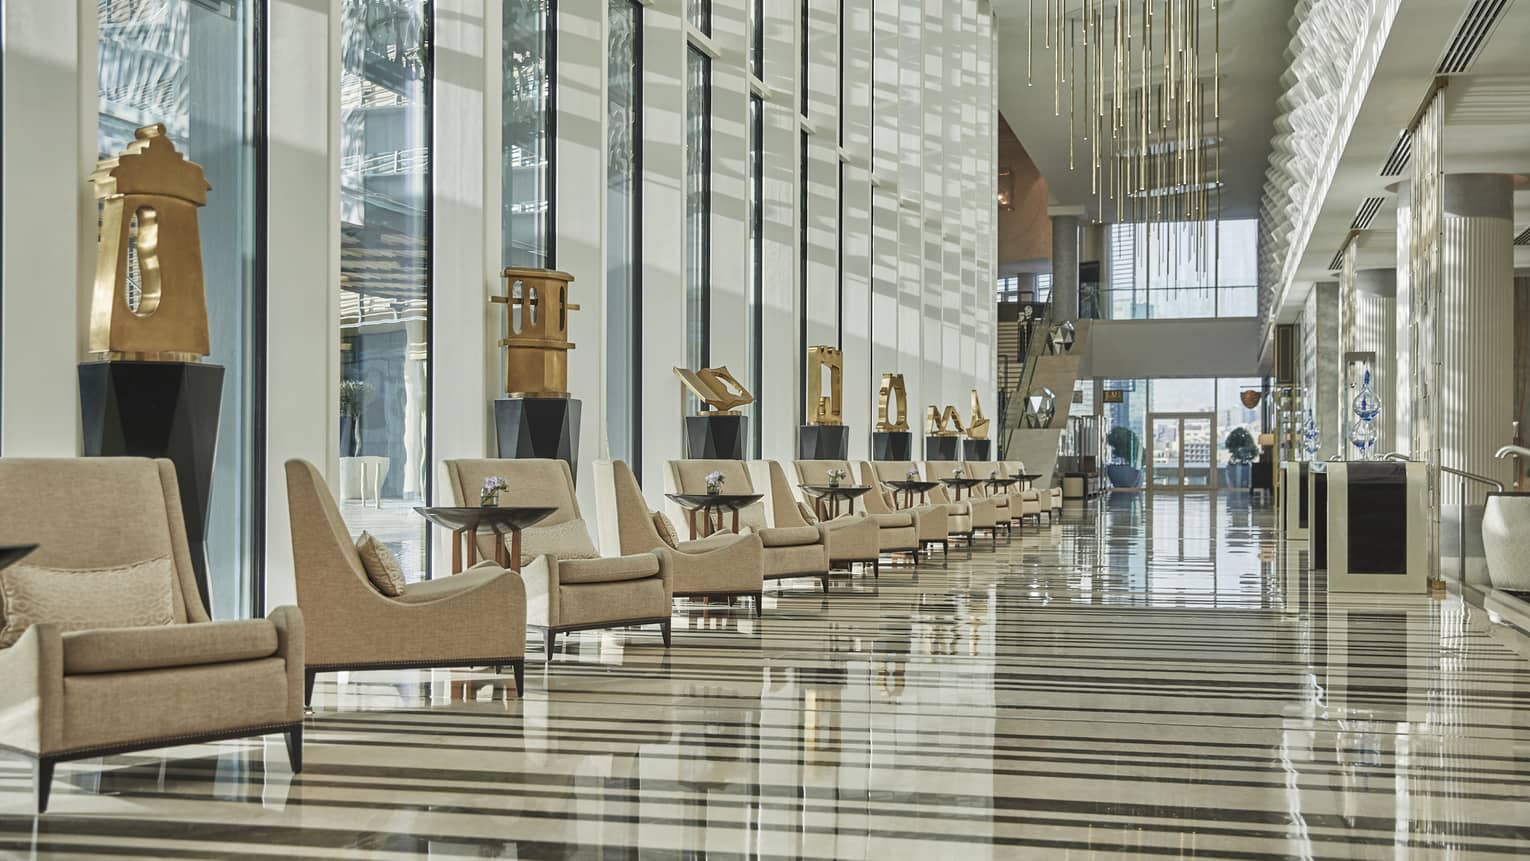 Hotel lobby with row of tan arm chairs, gold sculptures and floor-to-ceiling windows for natural light